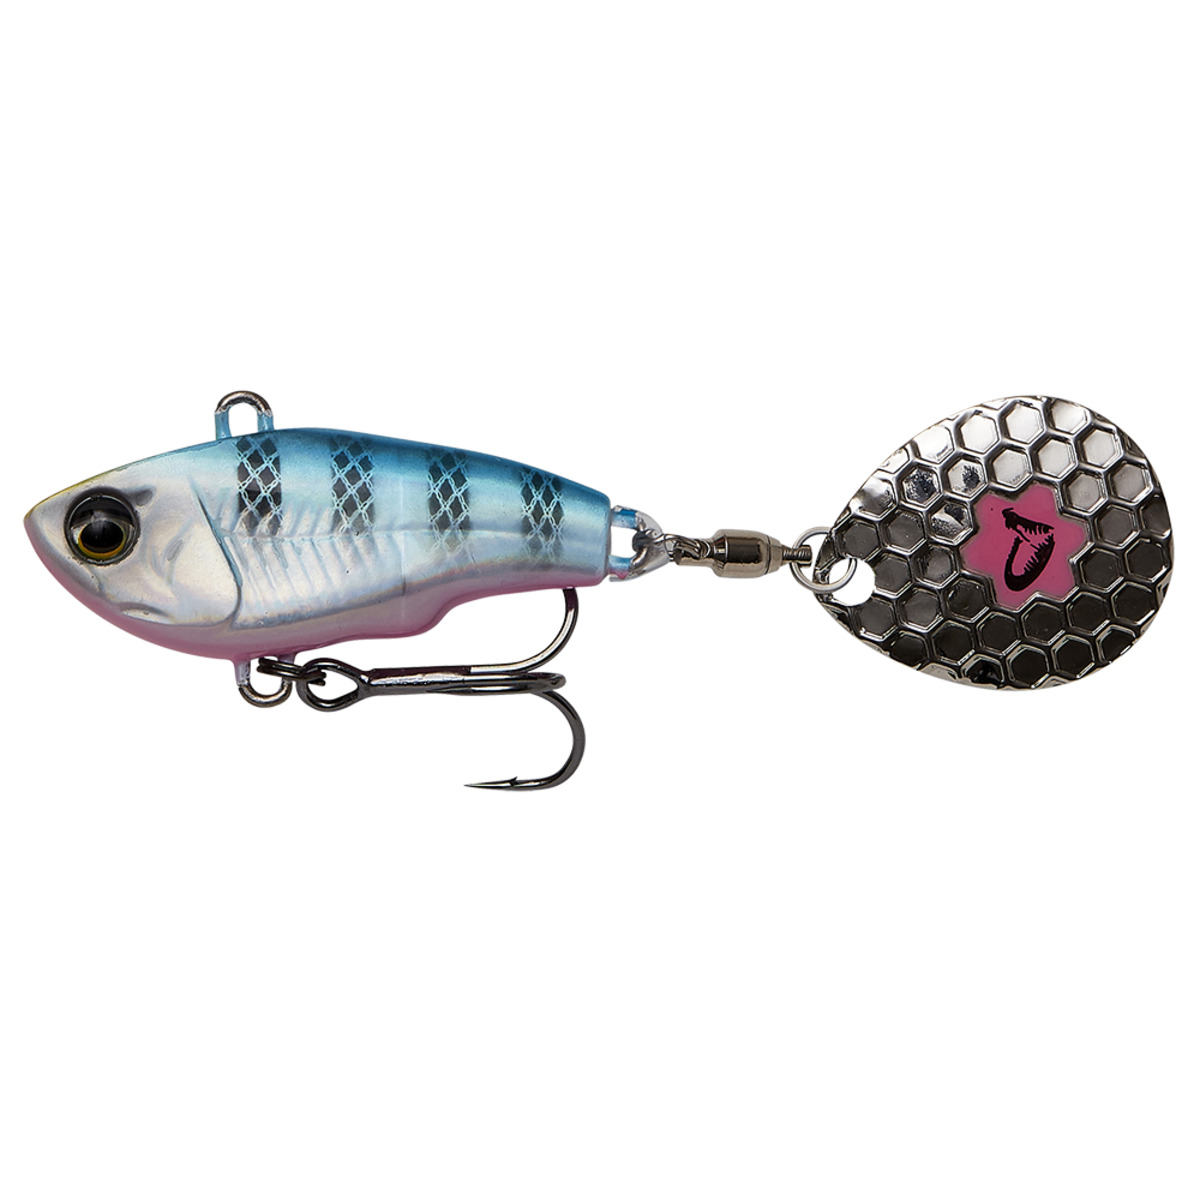 Savage Gear Fat Tail Spin 6.5cm 16g Sinking - BLUE SILVER PINK